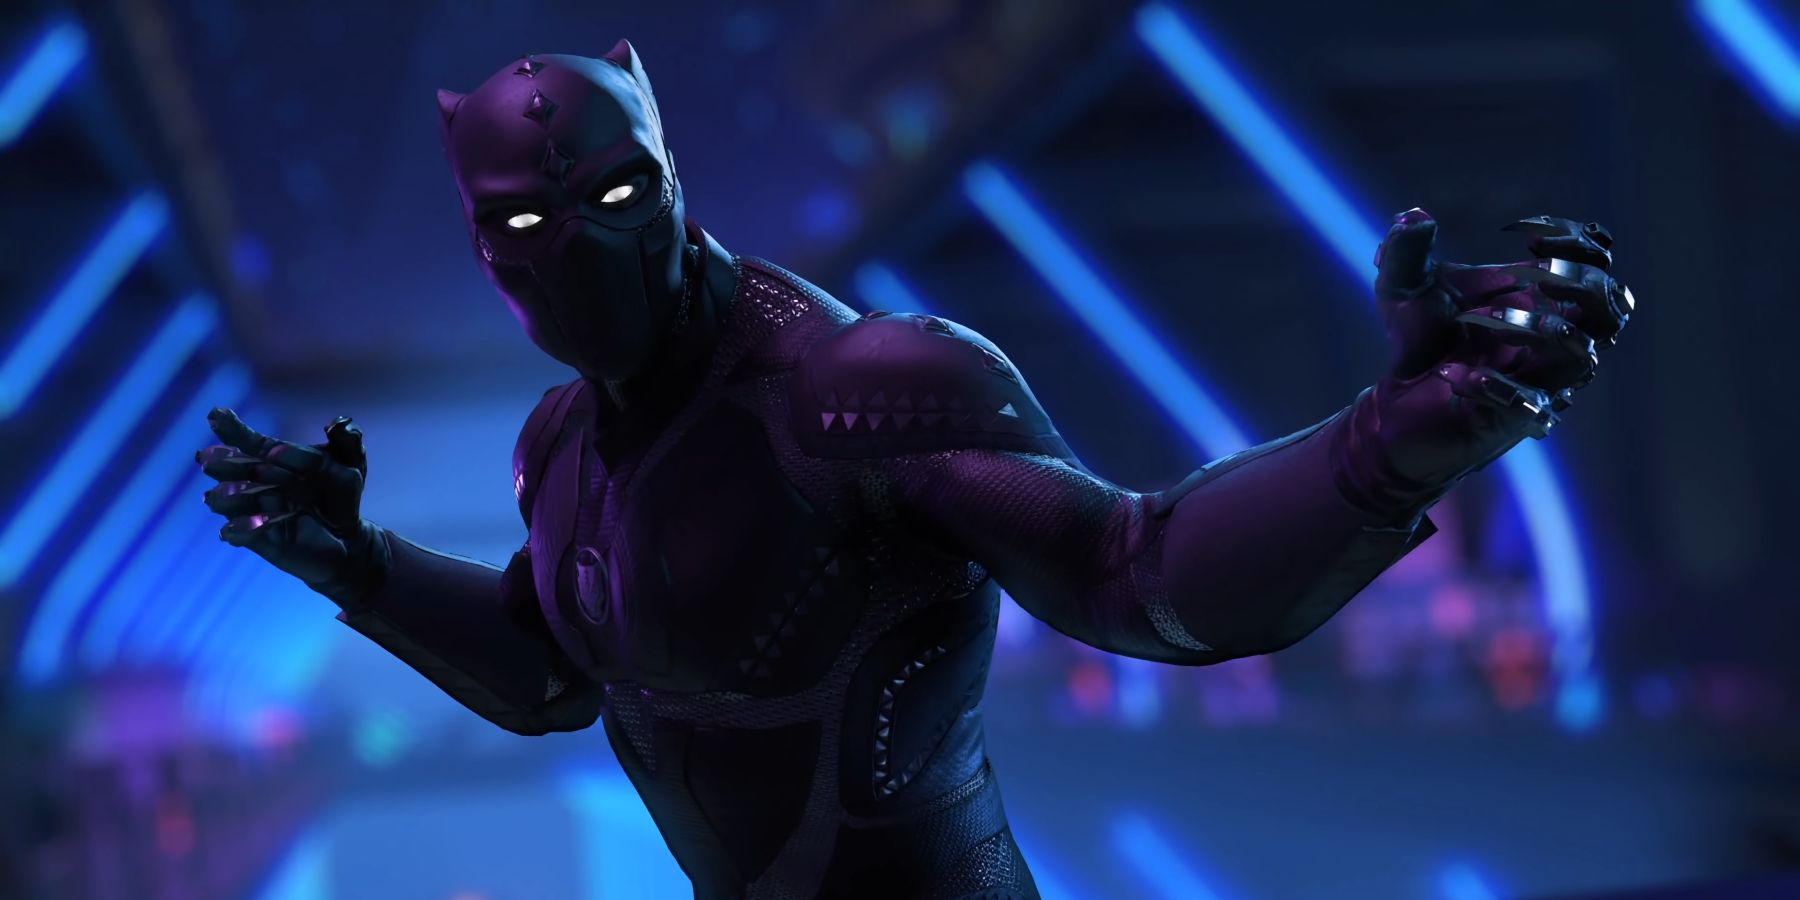 Black Panther readying himself to fight Klaw in Marvel's Avengers